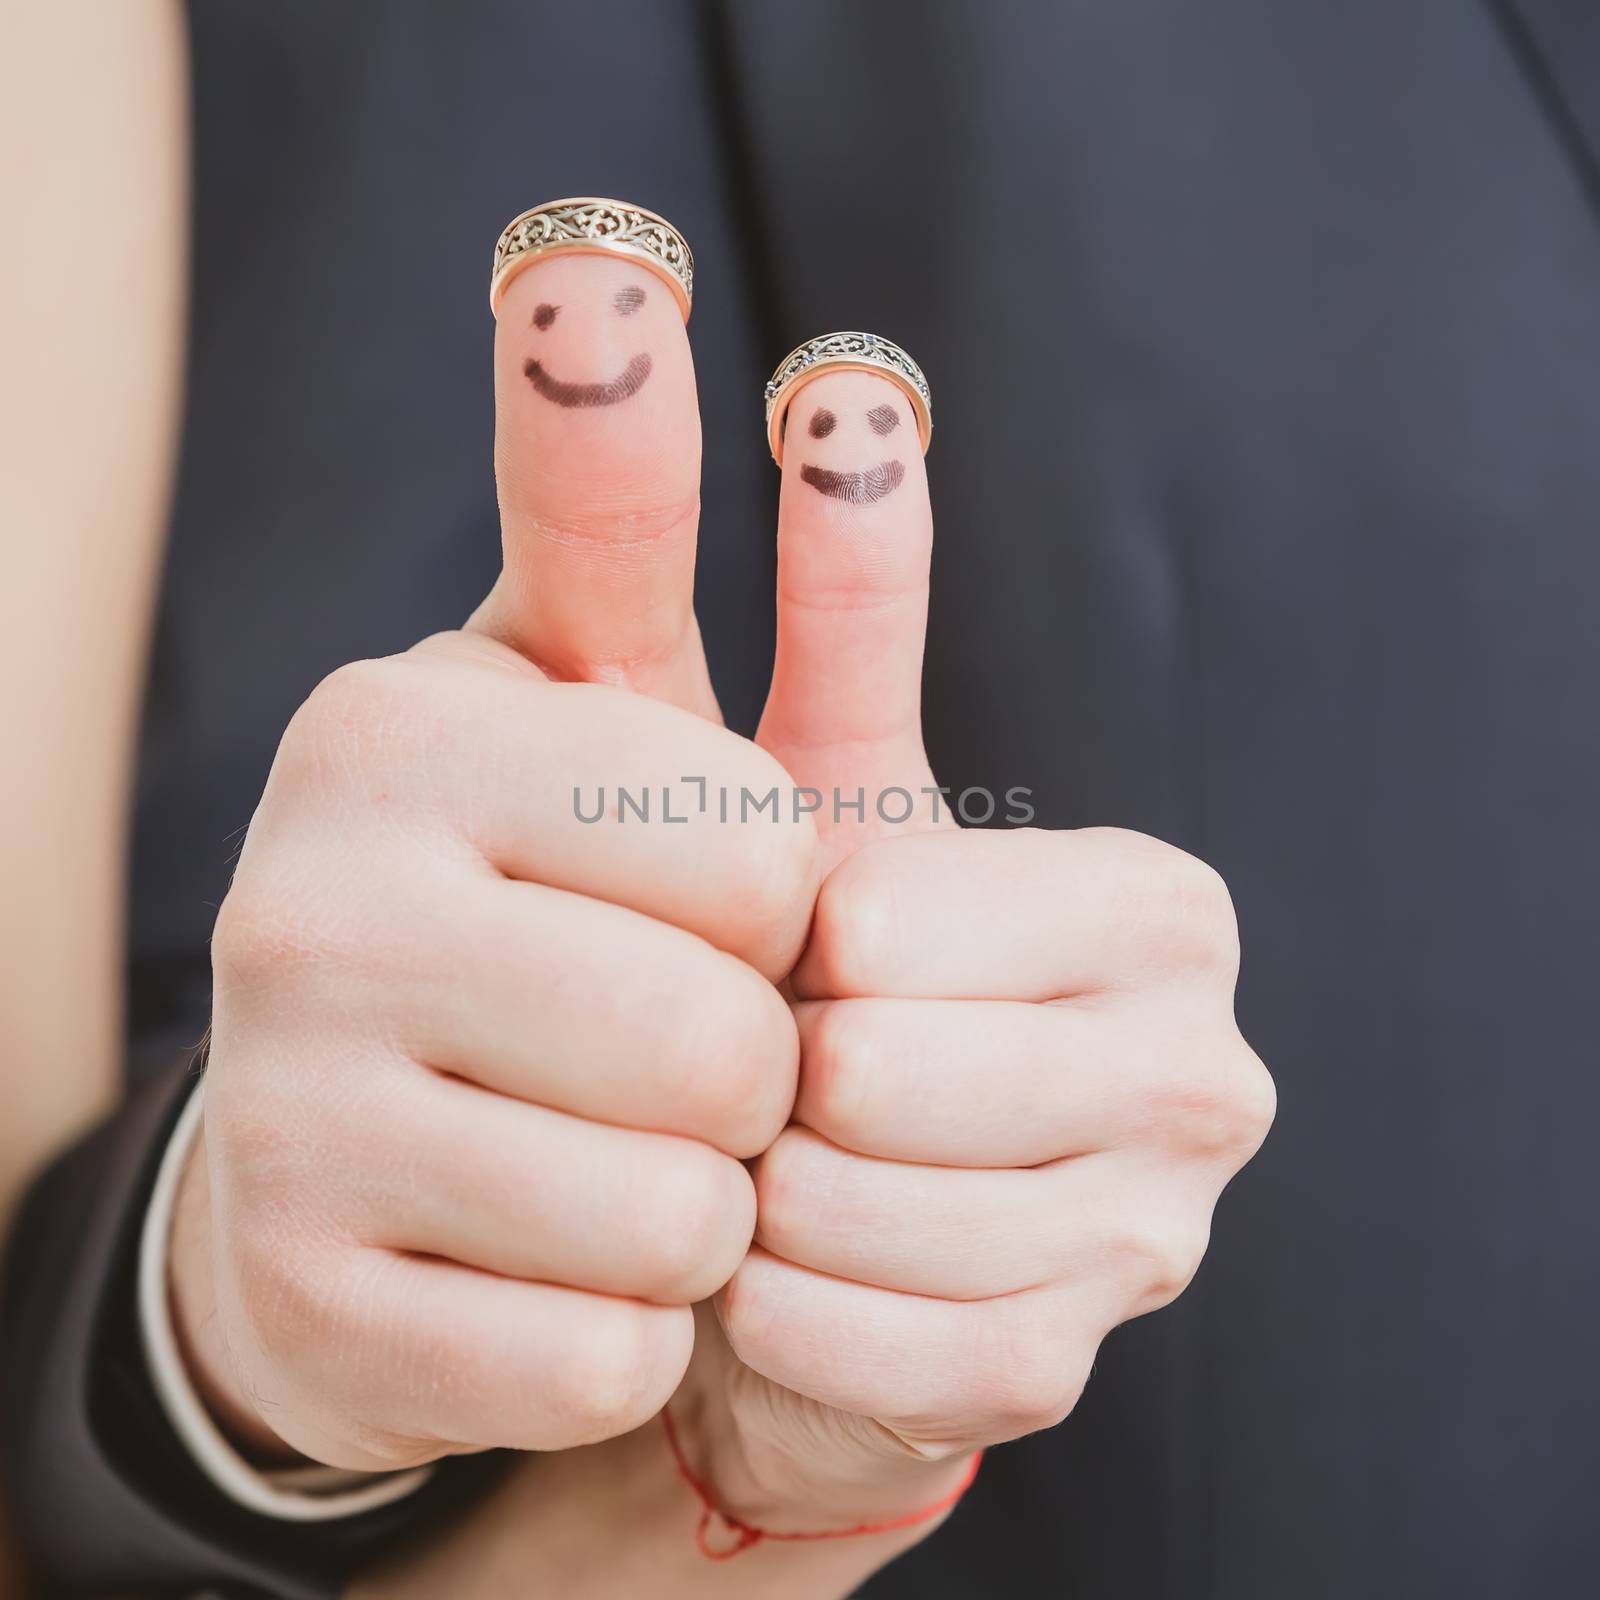 wedding rings on their fingers painted with the bride and groom, funny little people. conceptual idea